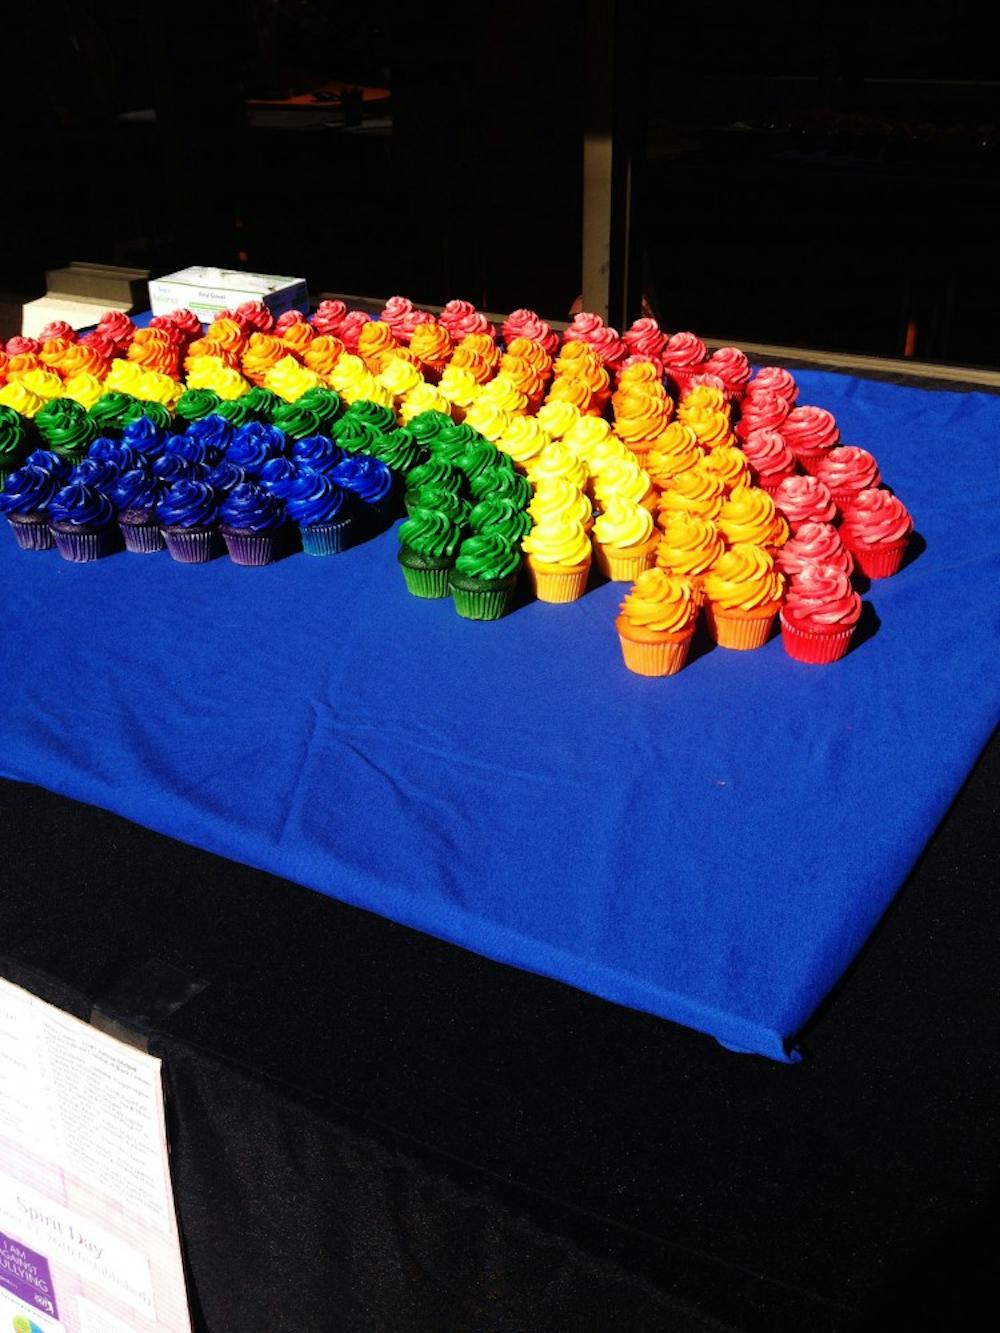 SAFE cupcakes bring color to LGBT adversity